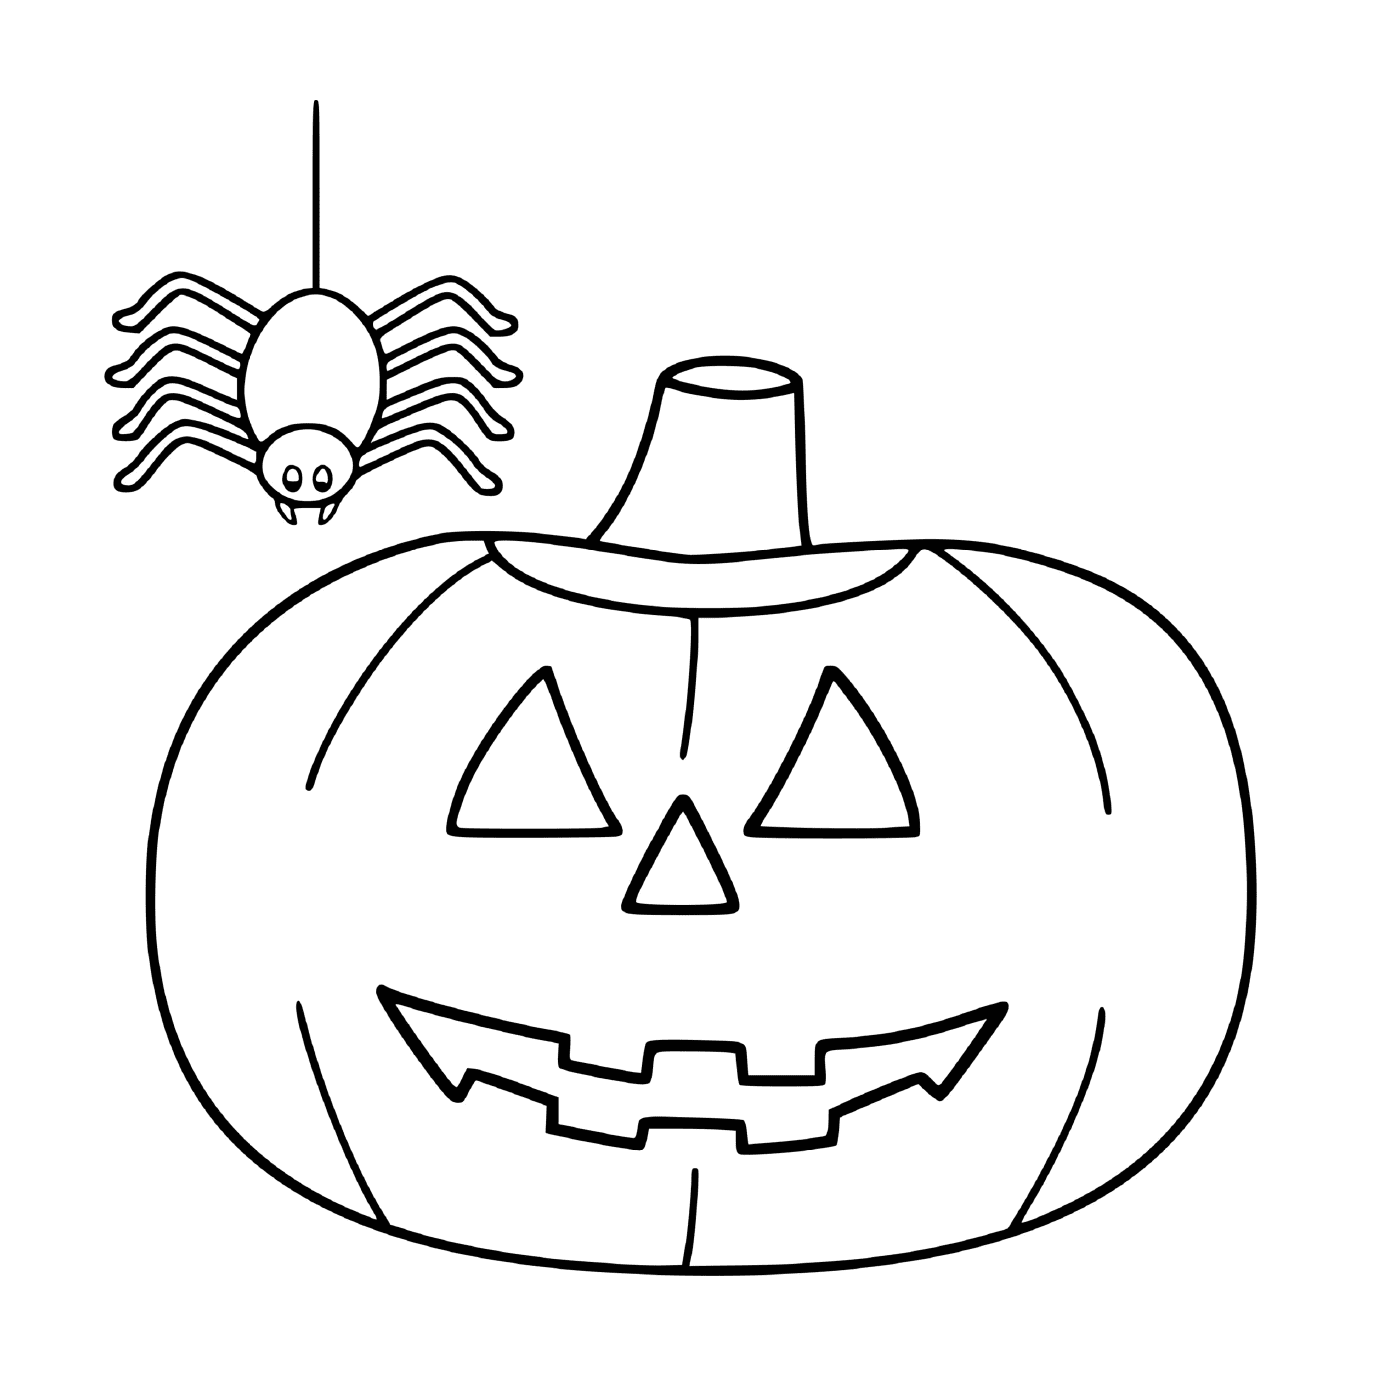  Pumpkin with a scary spider 